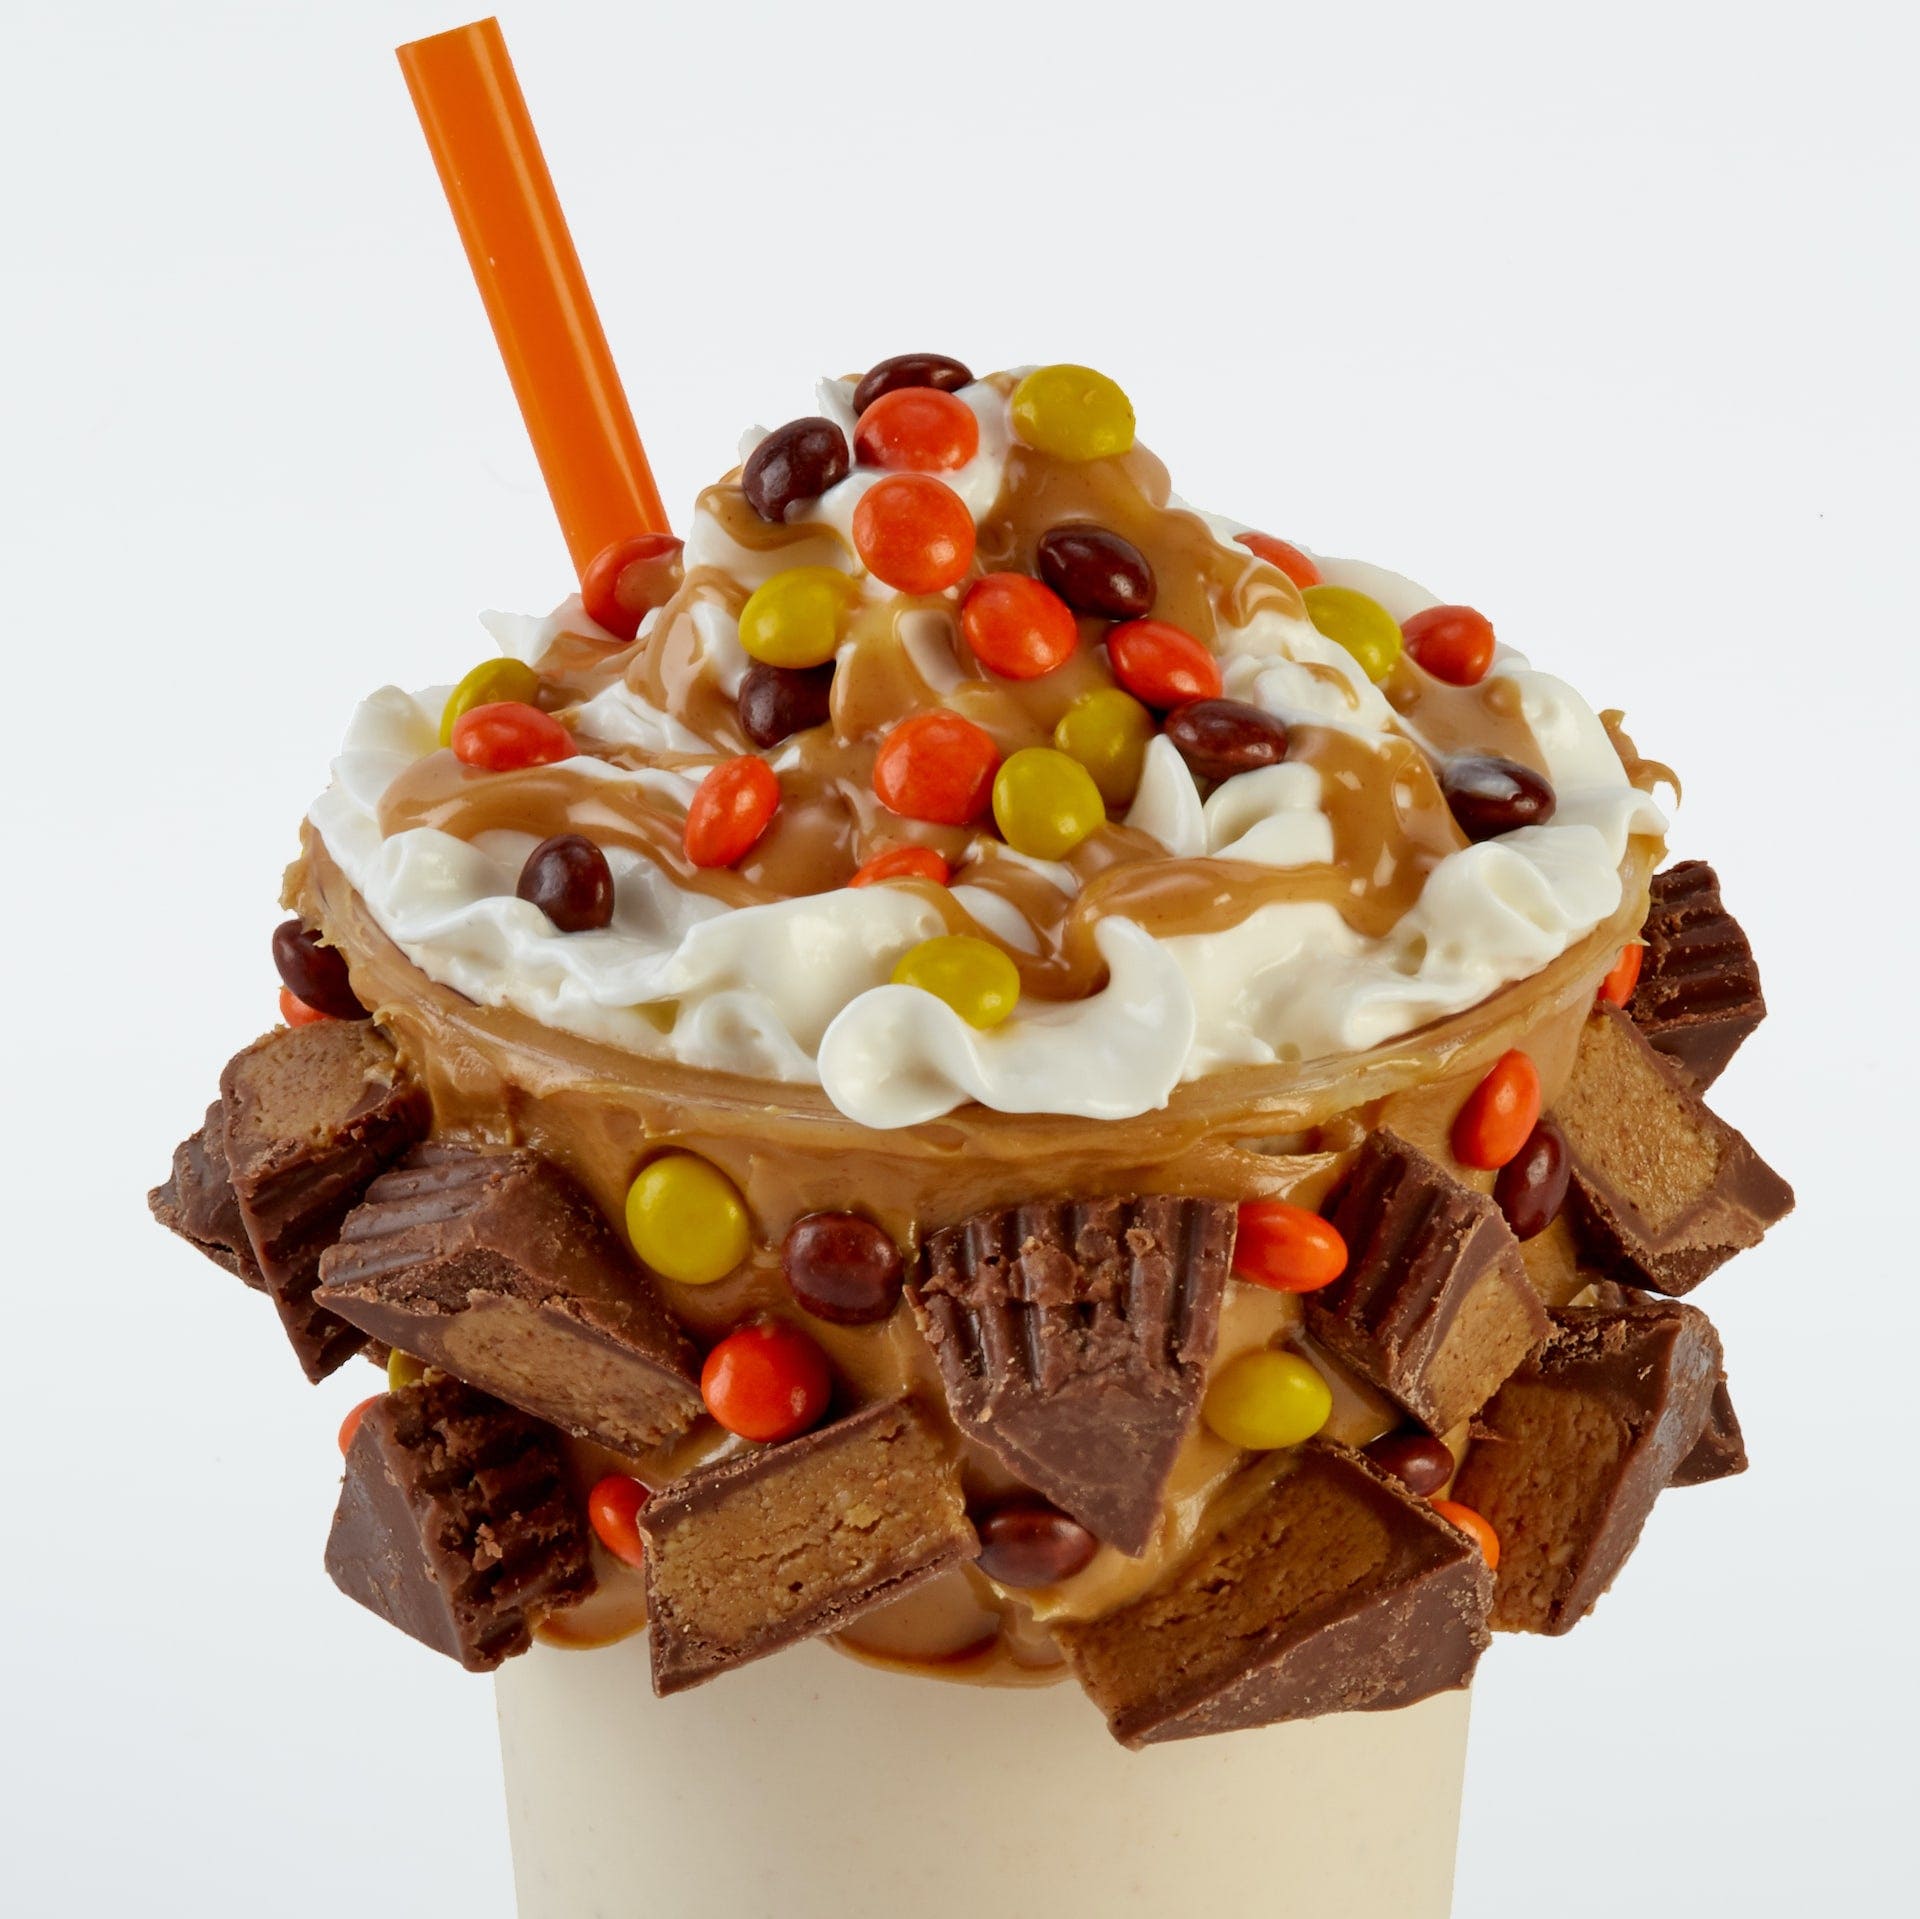 https://www.hersheyfoodservice.com/content/dam/hershey-foodservice/images/recipes/upscaled/extreme-reeses-peanut-butter-shake.jpg